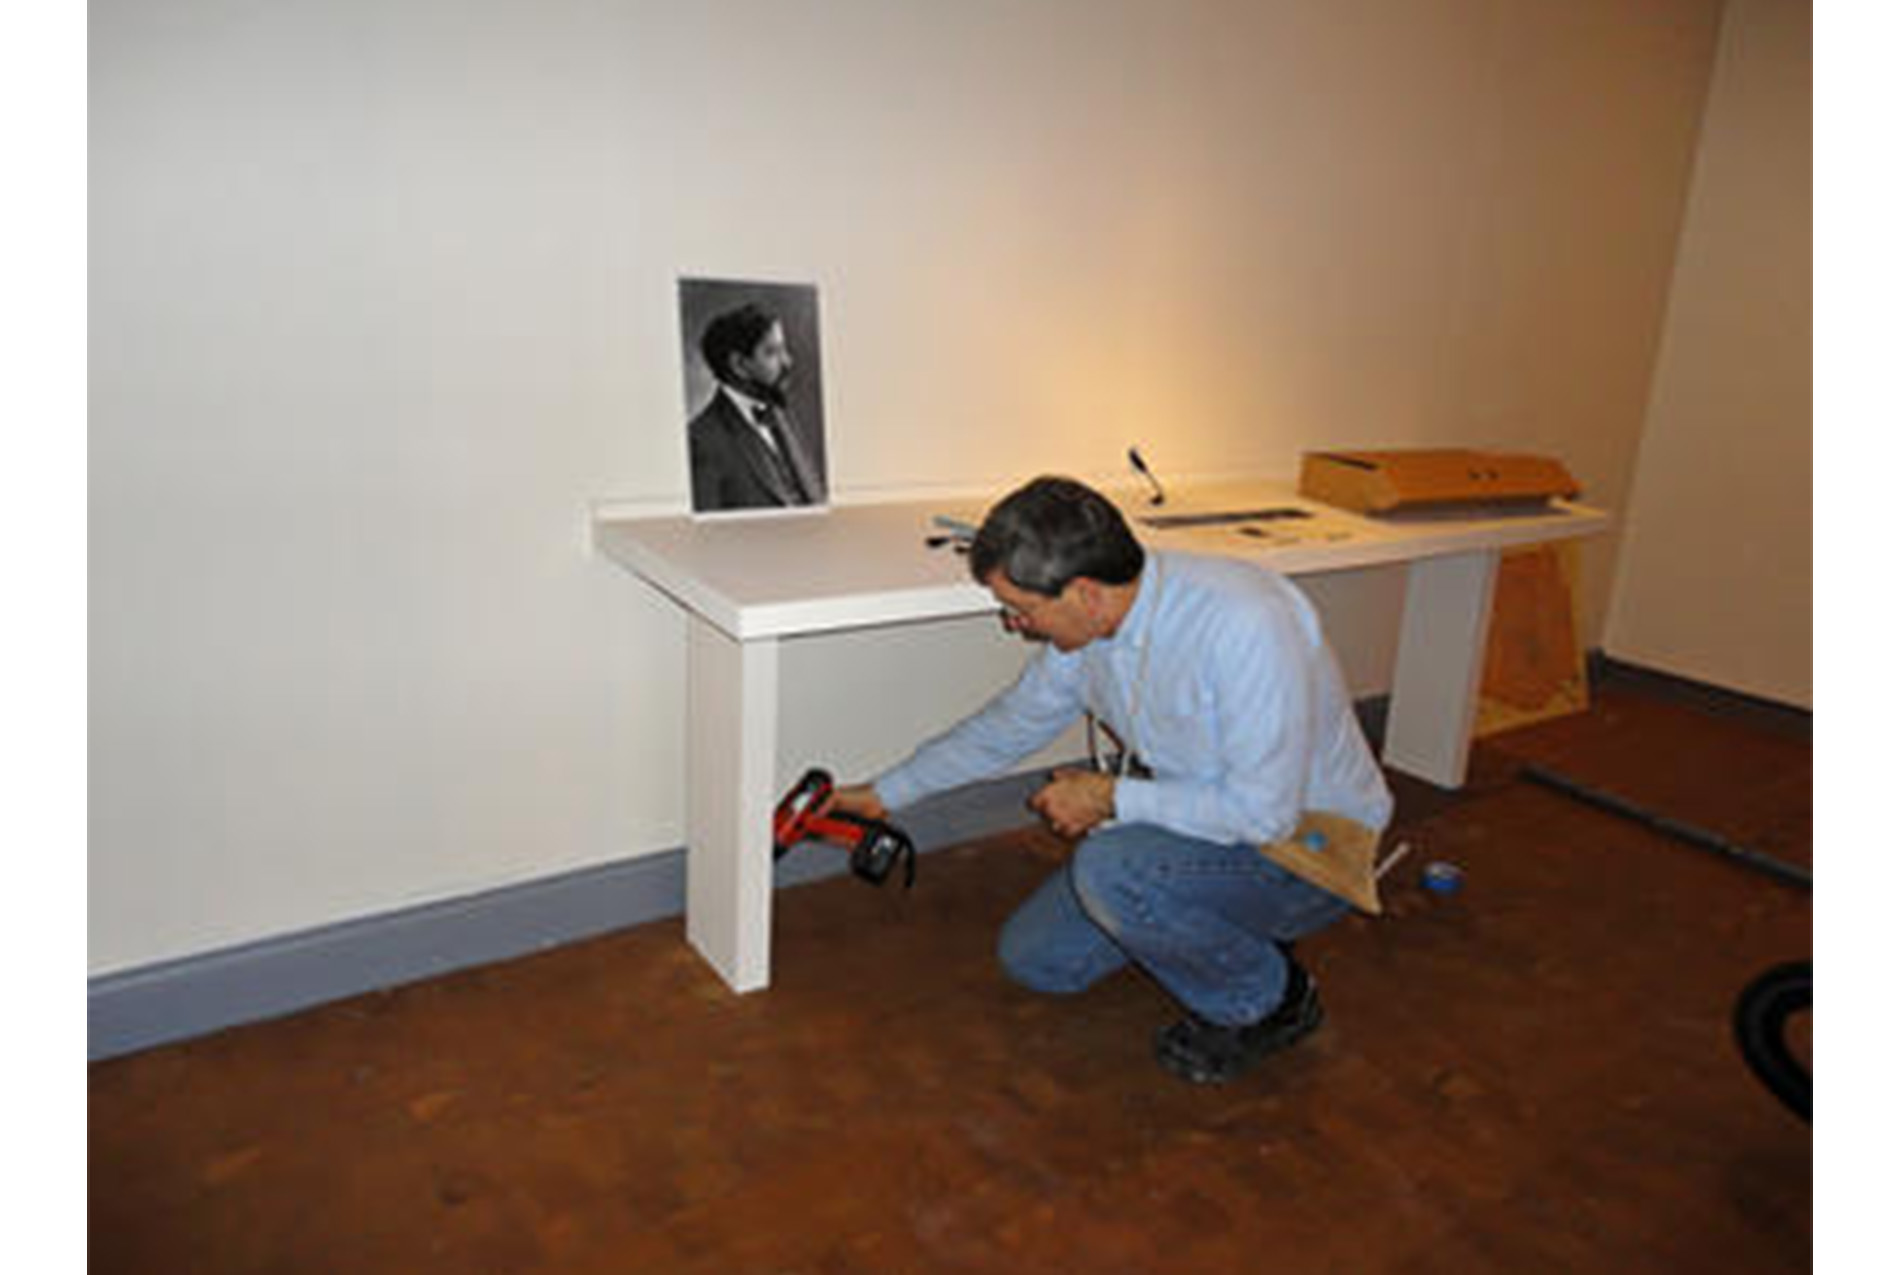 man sits in an art gallery below a table holding a power drill; photograph of profile view of man sits on the table above him